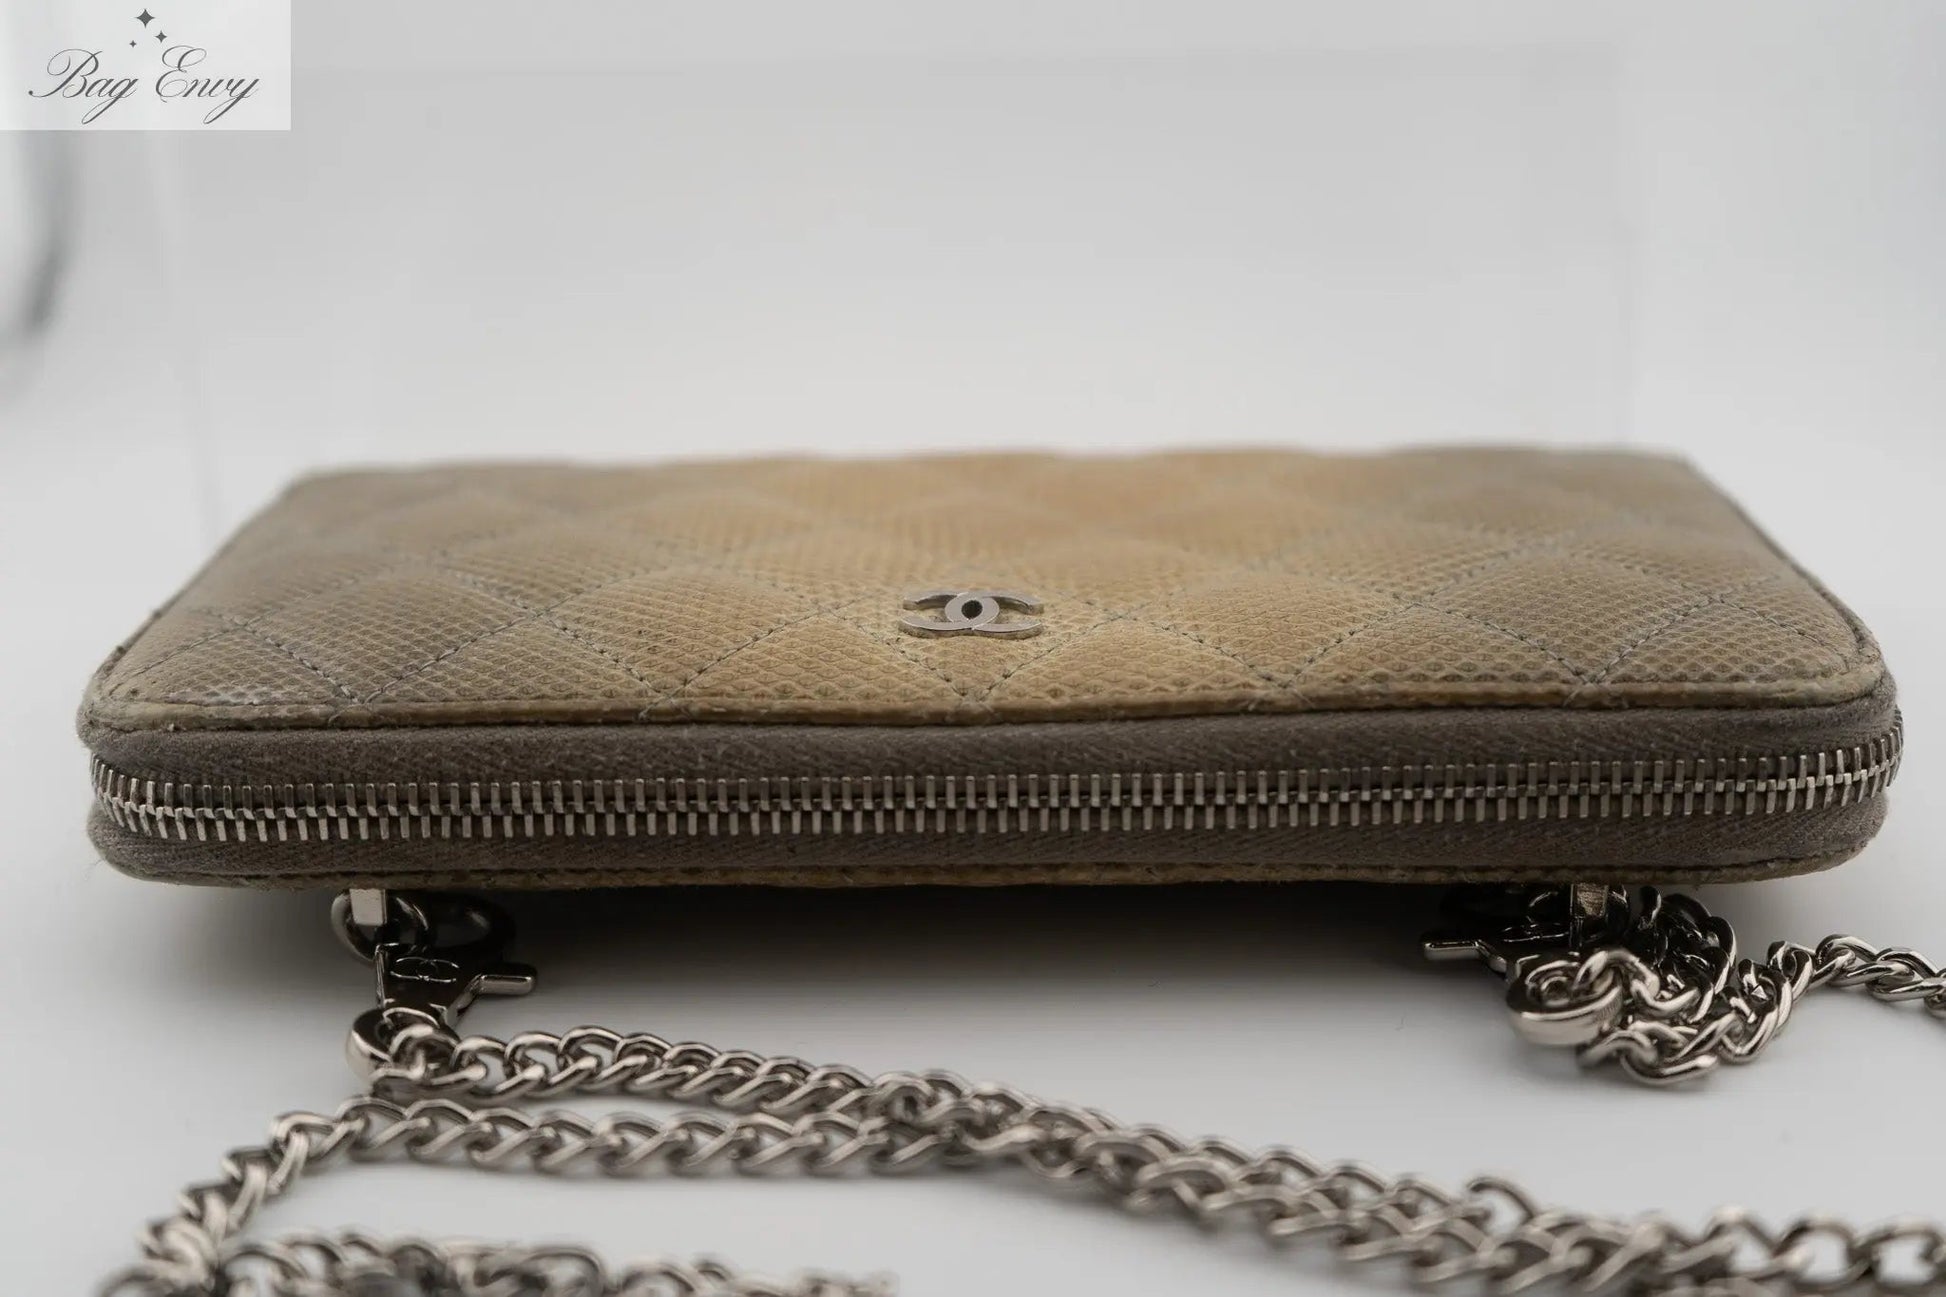 CHANEL Python Zip Wallet with Adjustable Chain - Bag Envy